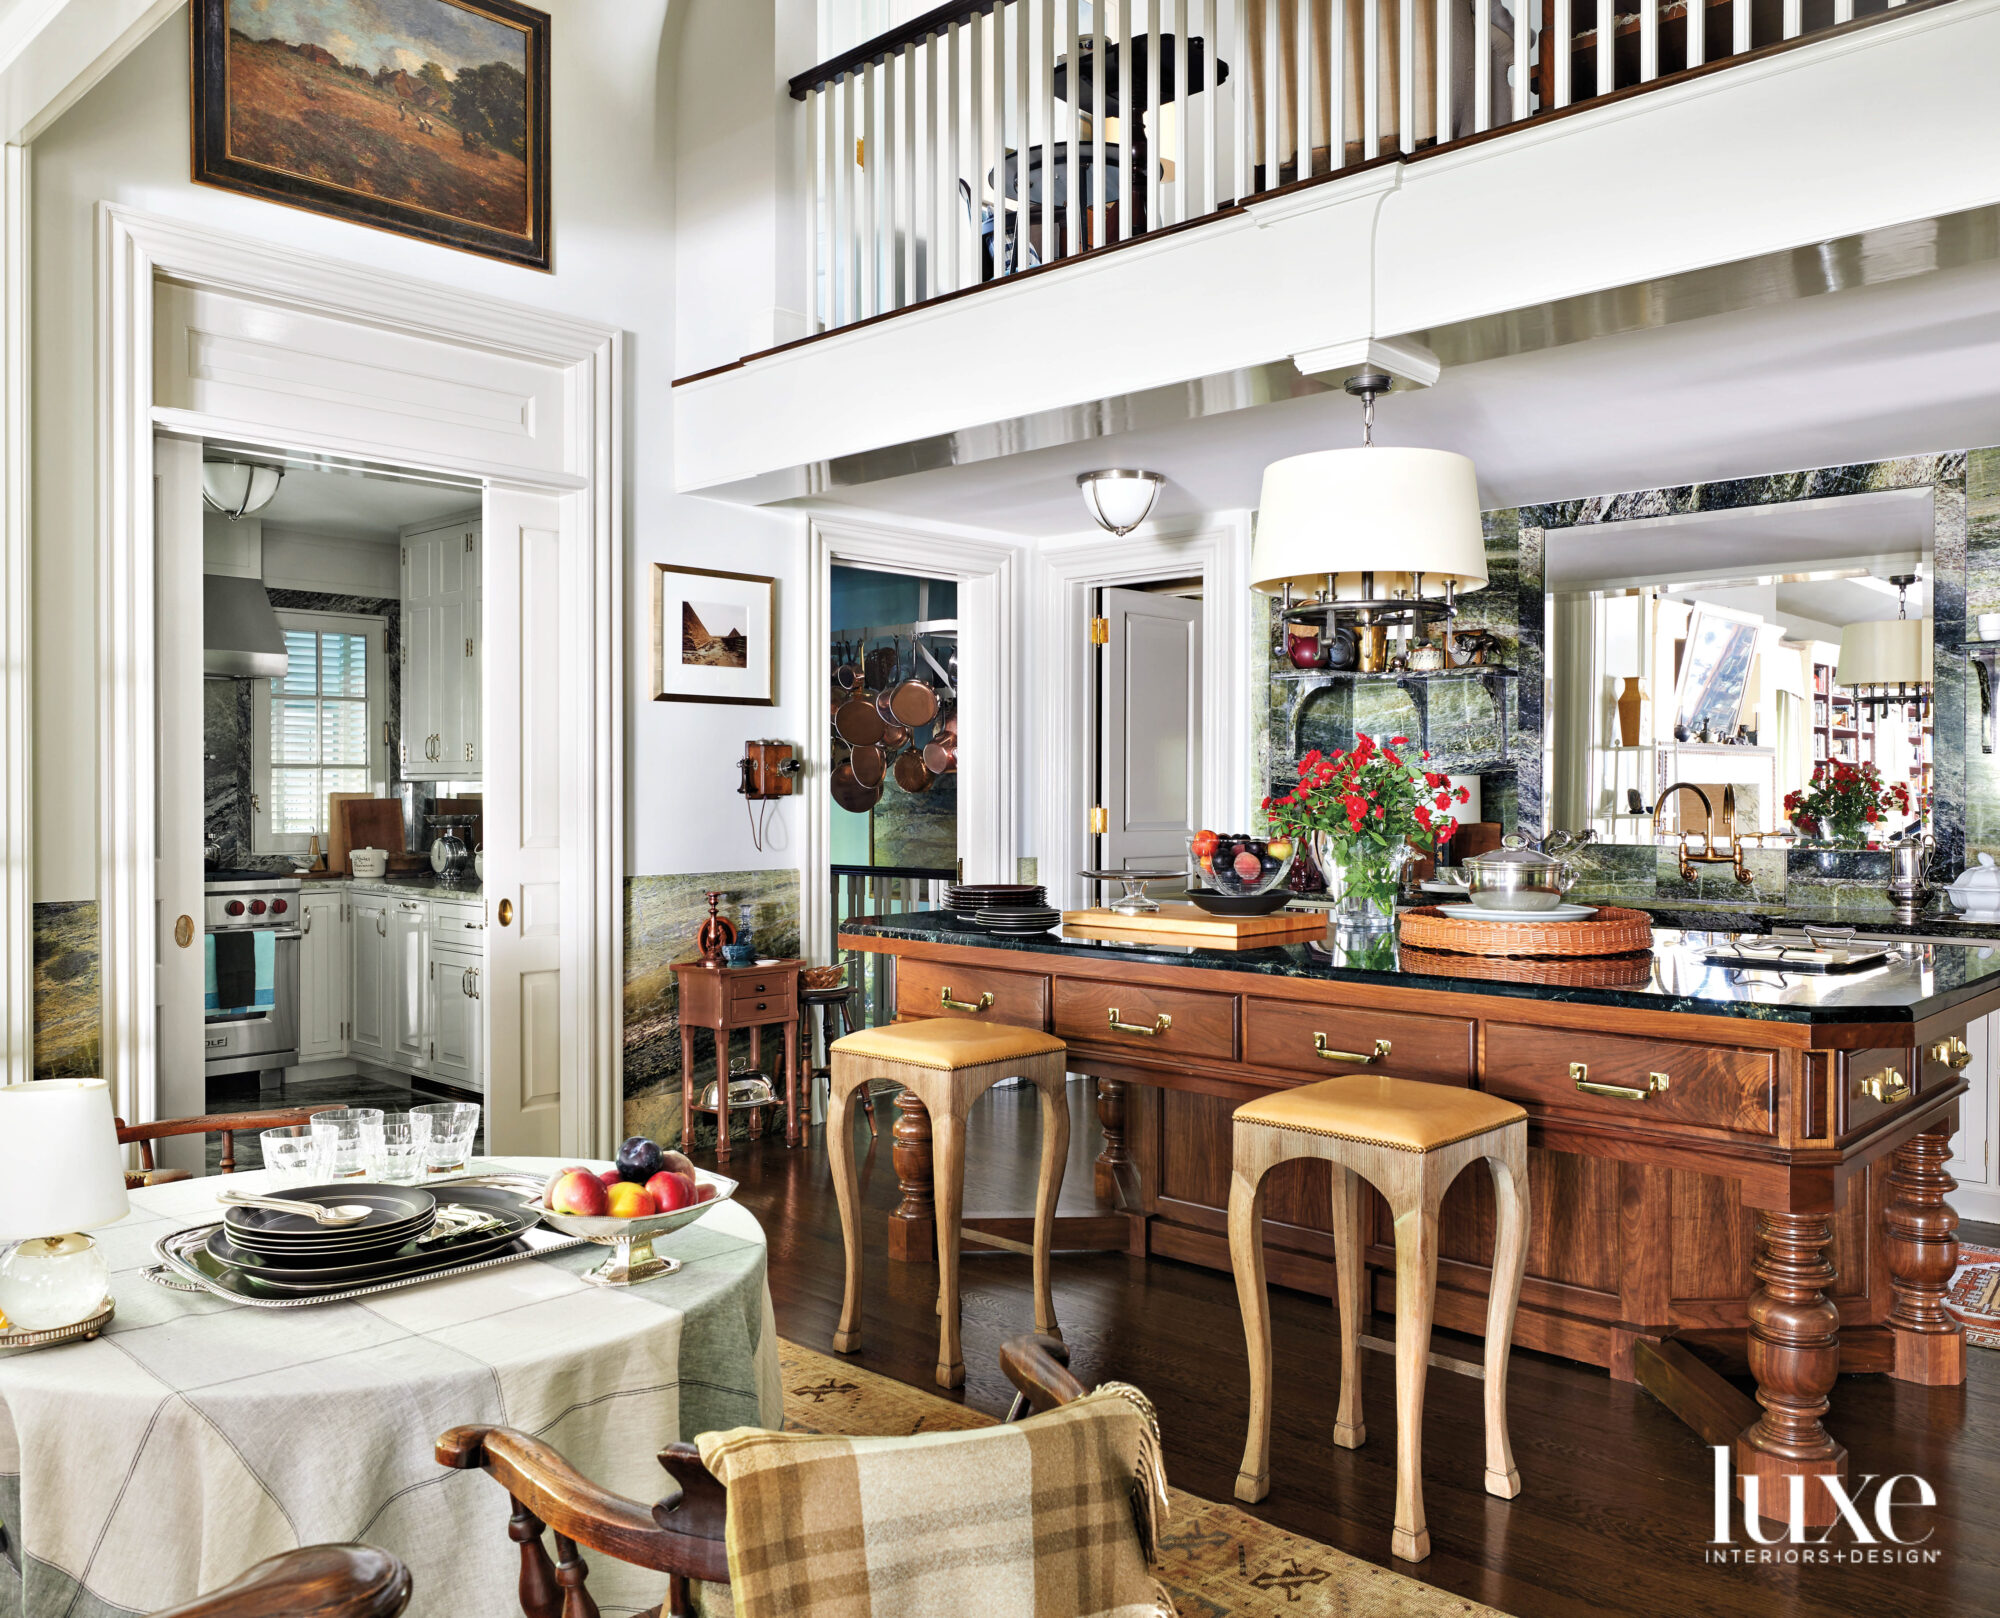 It’s All About Elegant Details In This Curated Kitchen Space